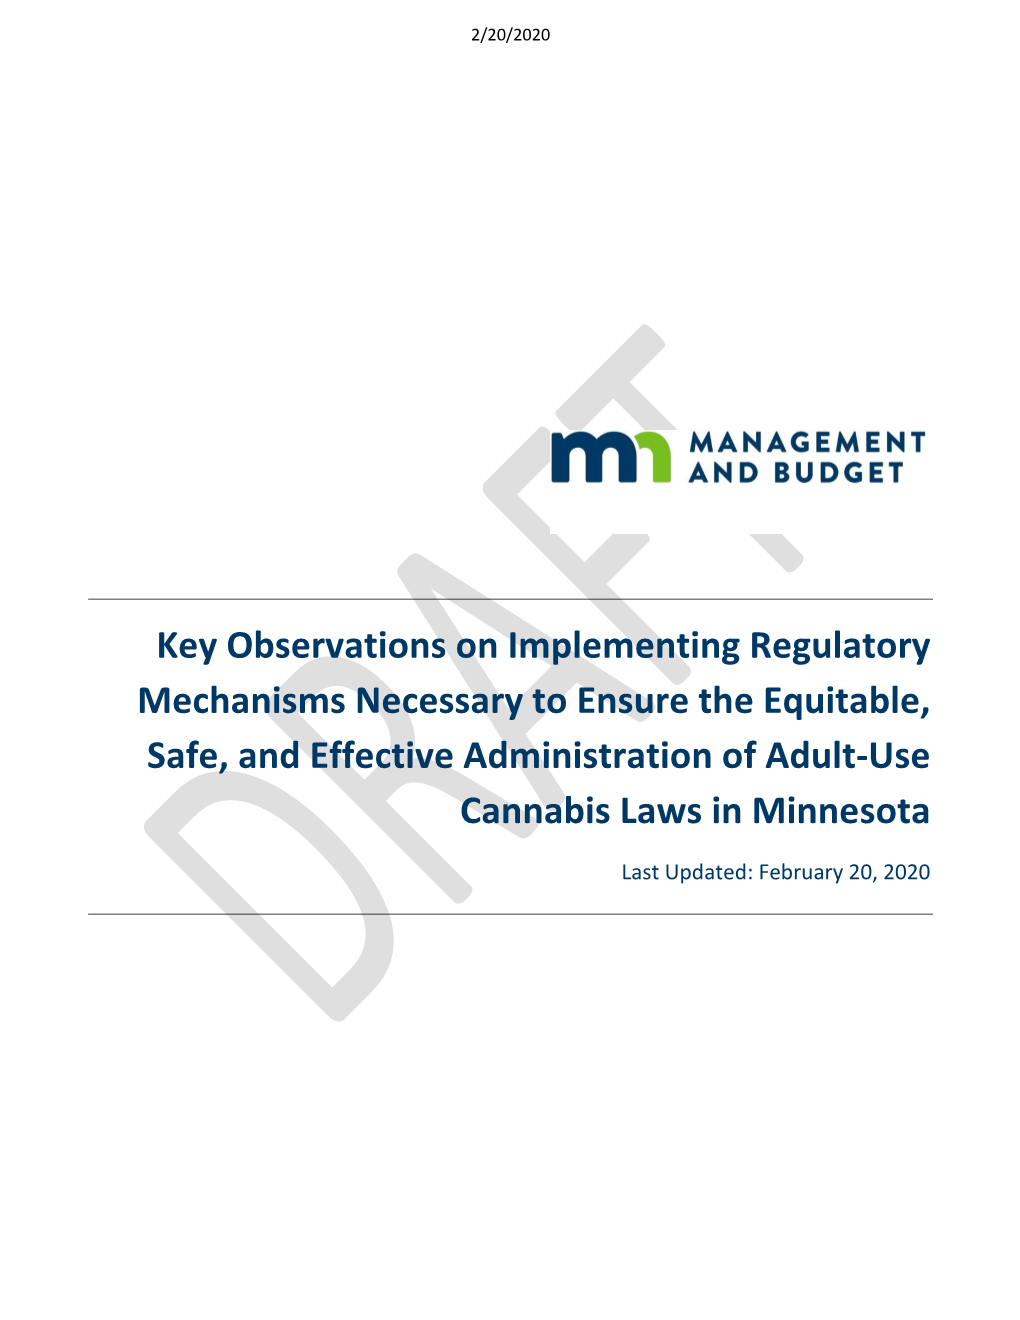 Key Observations on Implementing Regulatory Mechanisms Necessary to Ensure the Equitable, Safe, and Effective Administration of Adult-Use Cannabis Laws in Minnesota